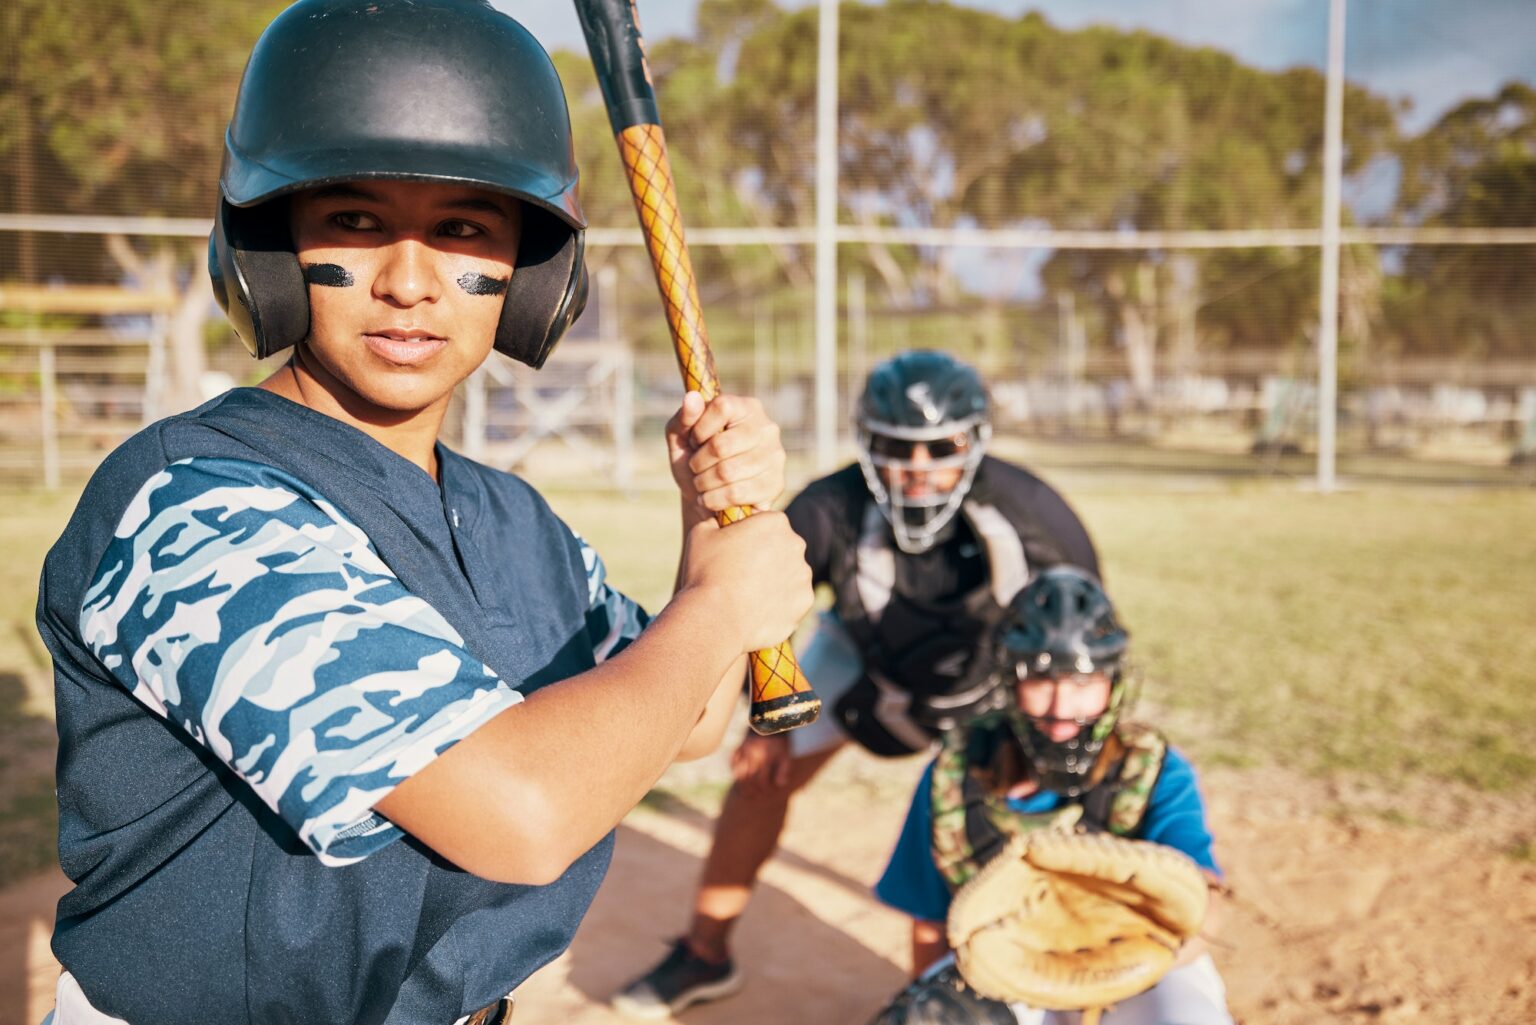 Teen in baseball uniform, a portrait of focus and motivation. Sport in high school can help fitness